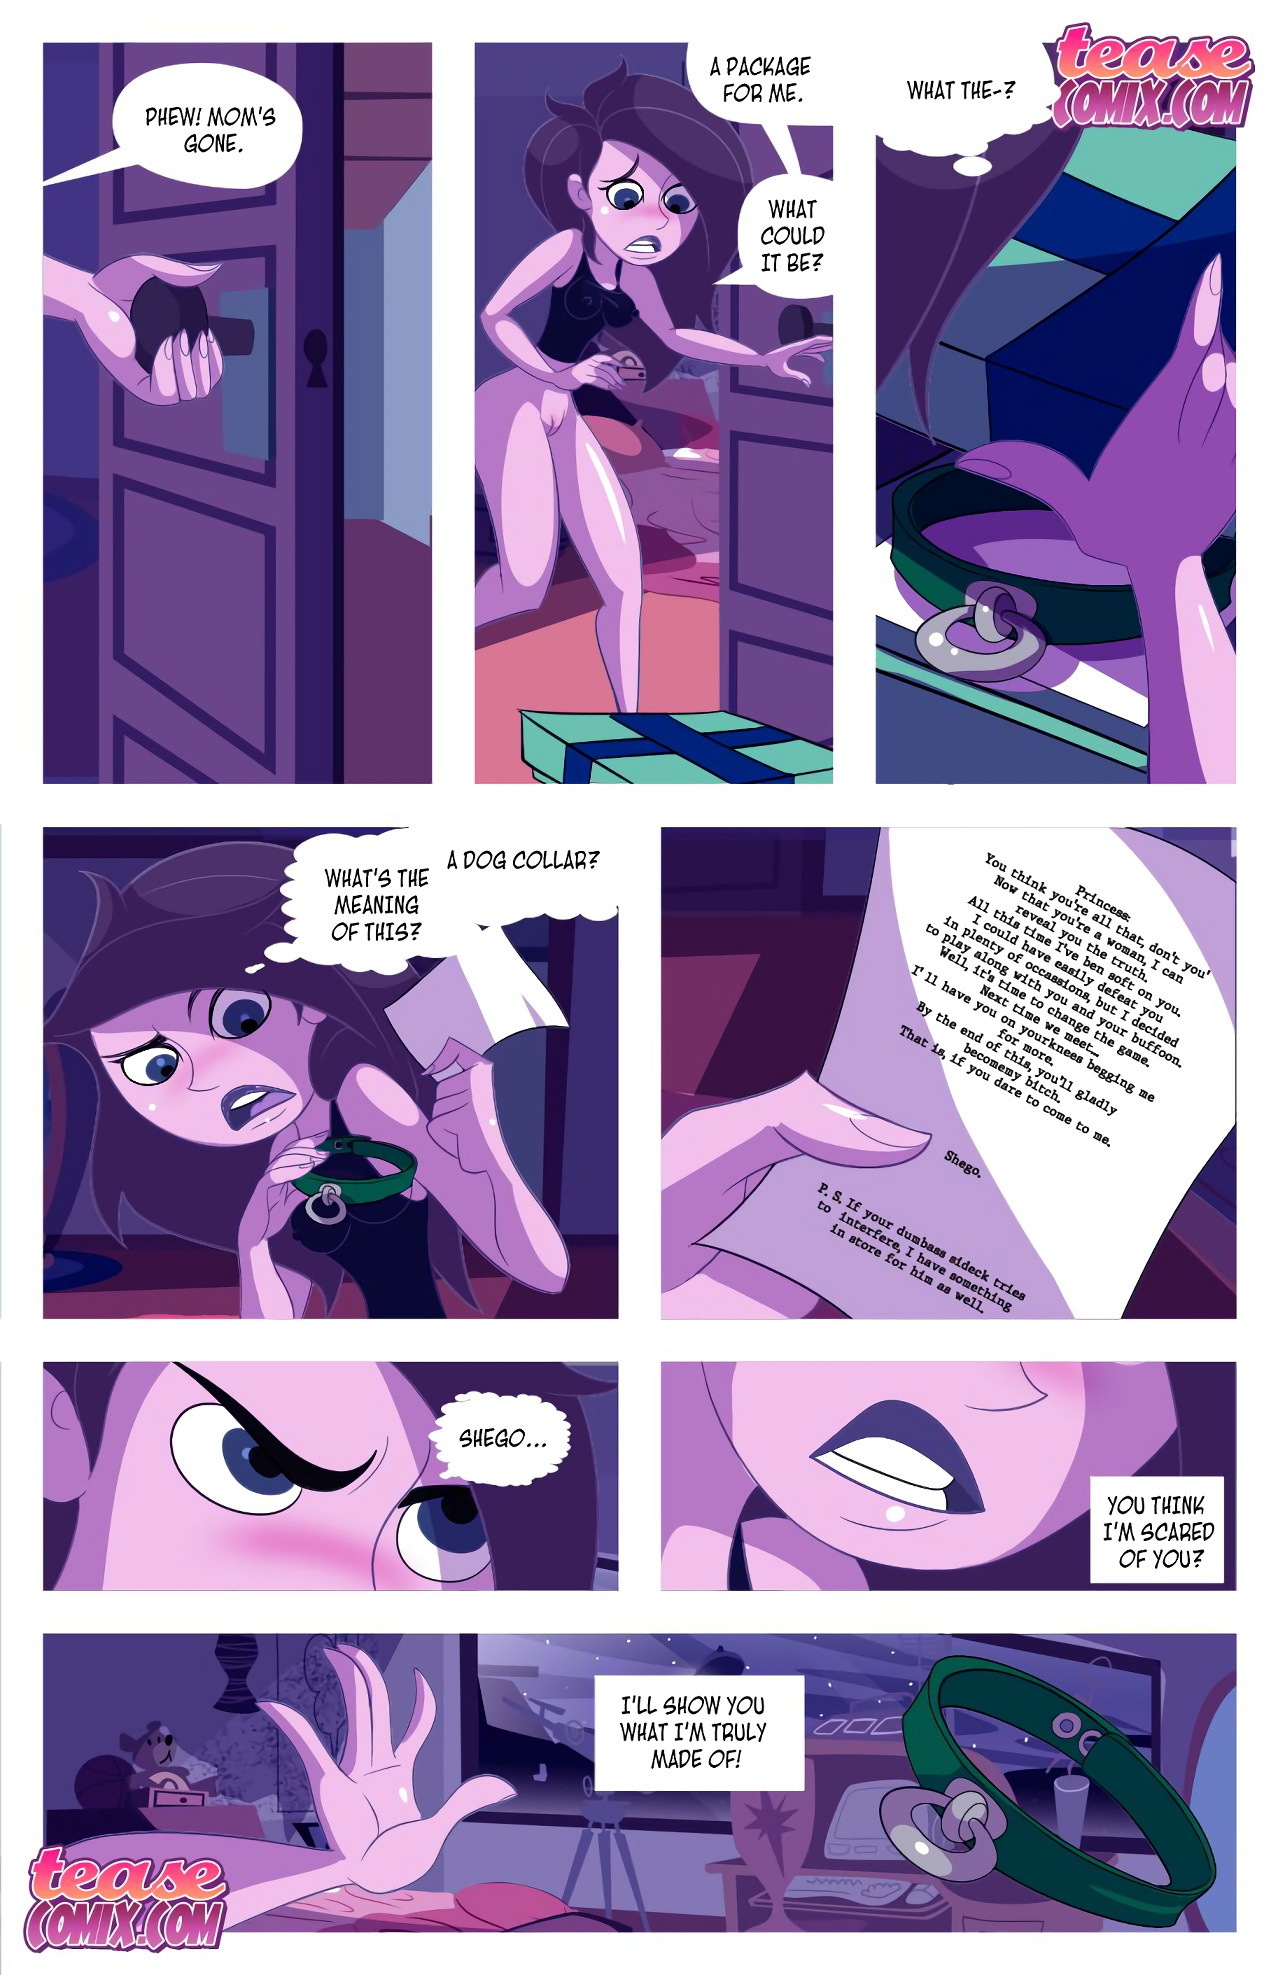 Kinky Possible - A Villain's Bitch Remastered - Page 22